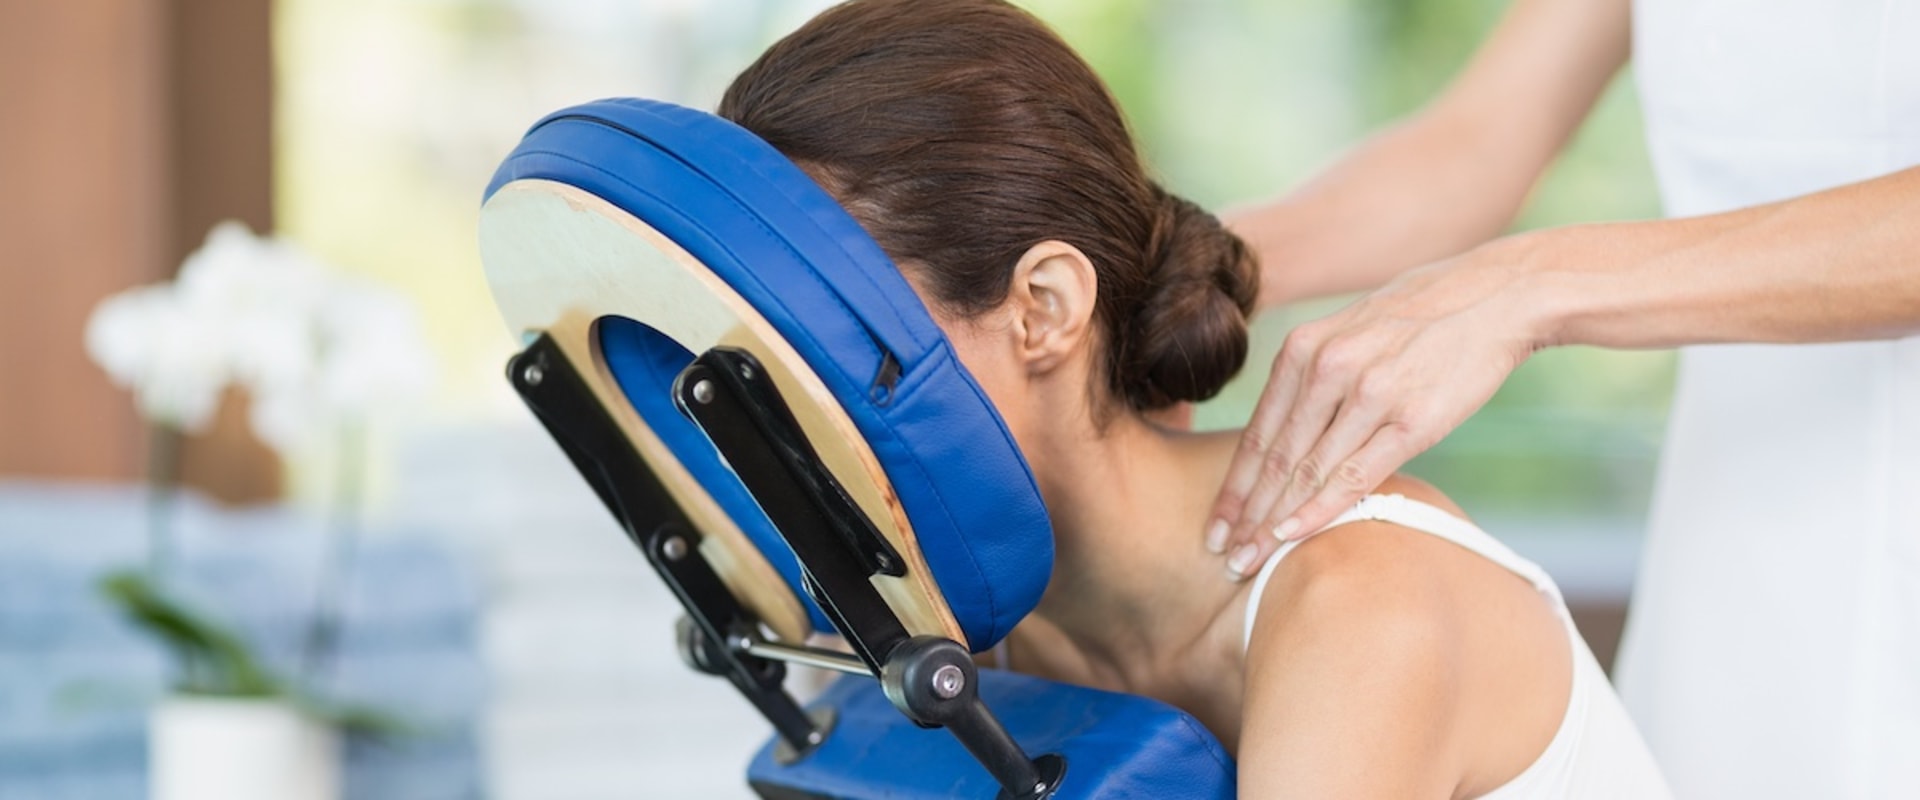 The Pros and Cons of Chair Massage vs Table Massage